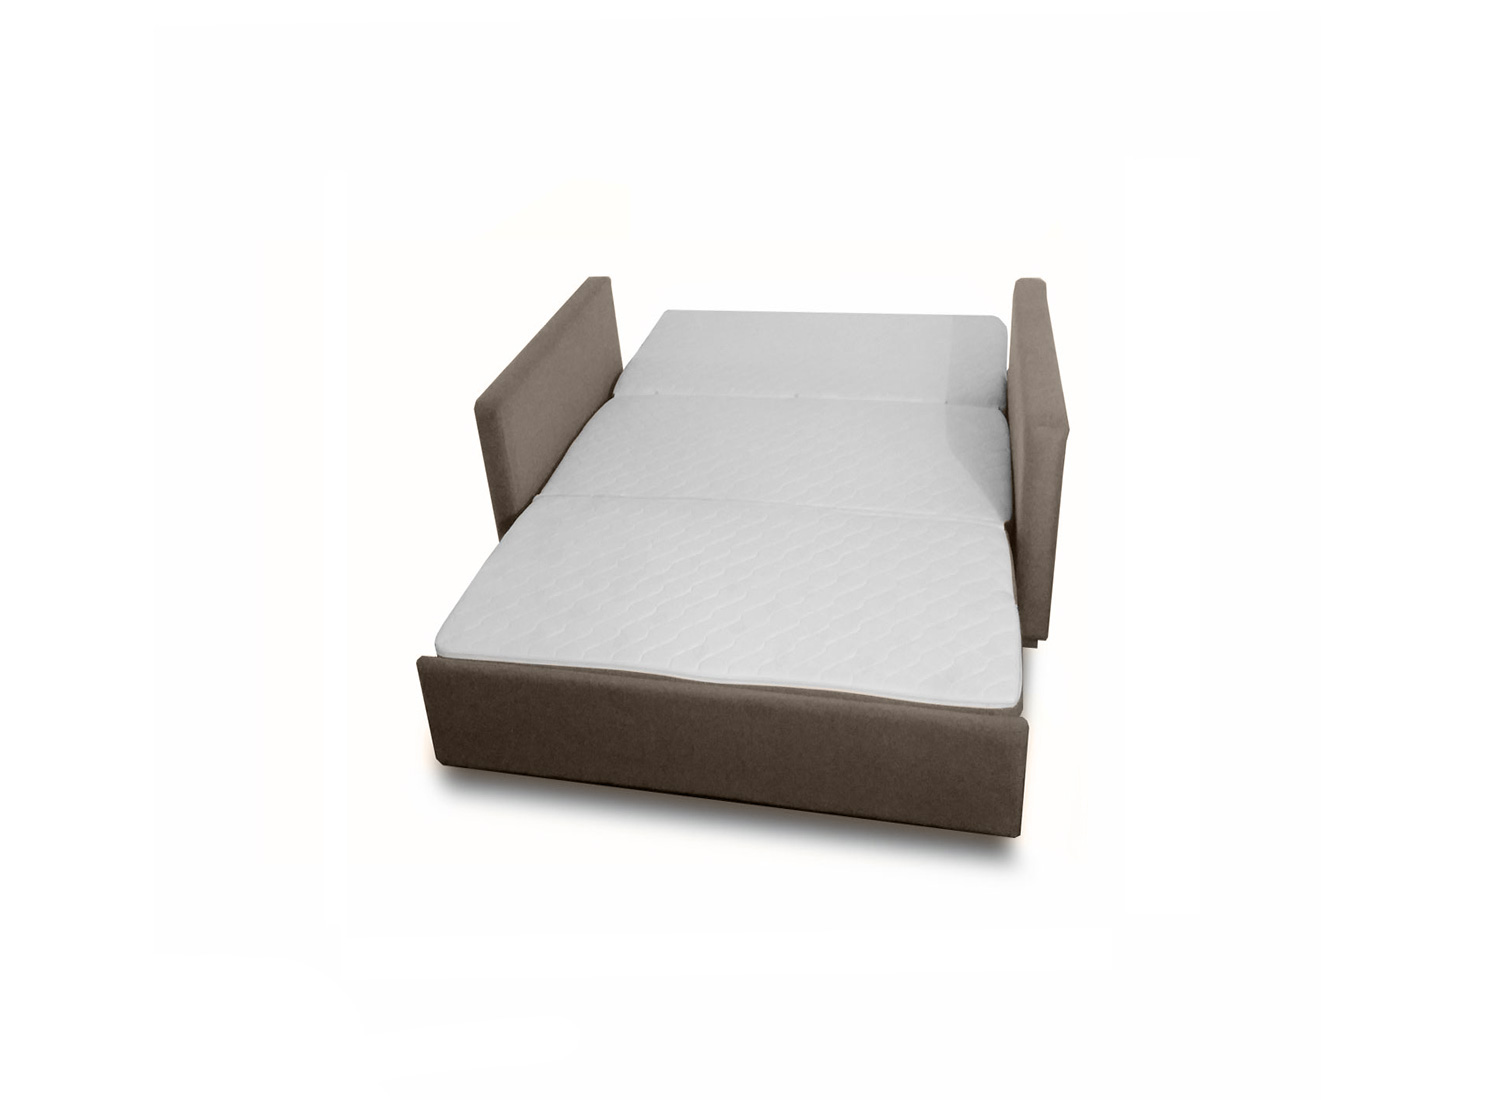 Early Baby interior Harmony - Single Sofa Bed with Memory Foam - Expand Furniture - Folding  Tables, Smarter Wall Beds, Space Savers